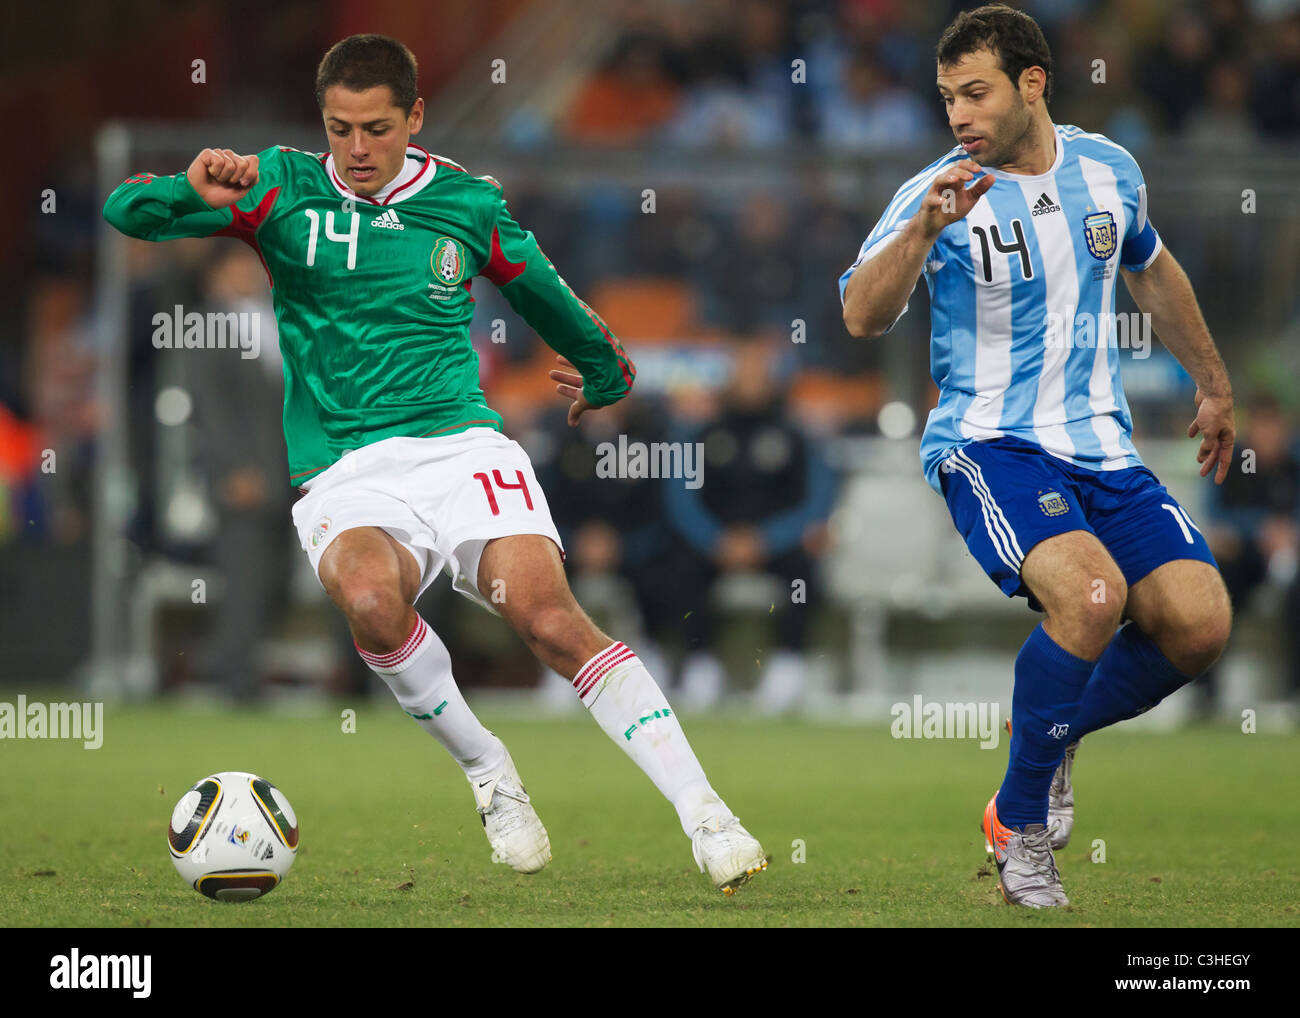 Javier Hernandez of Mexico (l) changes direction against Javier Mascherano of Argentina (r) during a 2010 World Cup soccer match Stock Photo